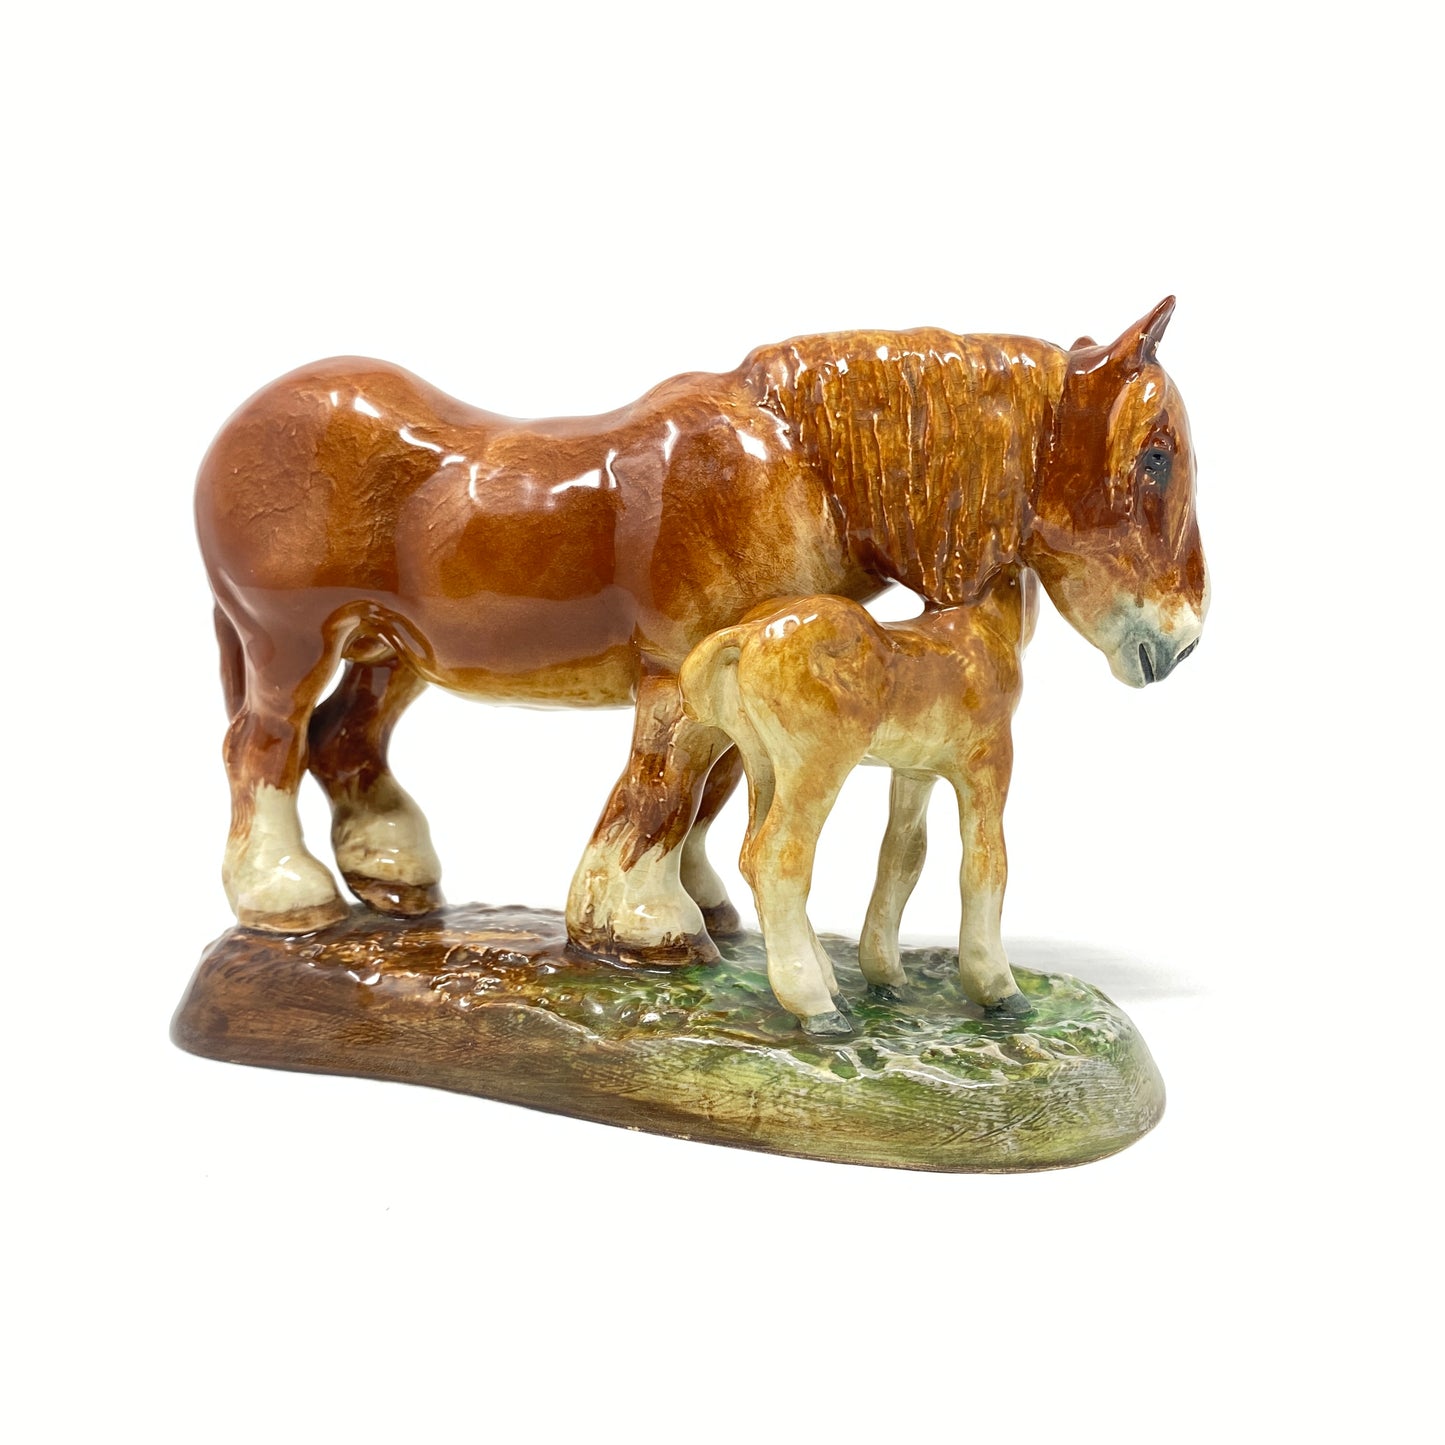 Royal Doulton "The Chestnut Mare" with Foal Figurine H.N. 2533